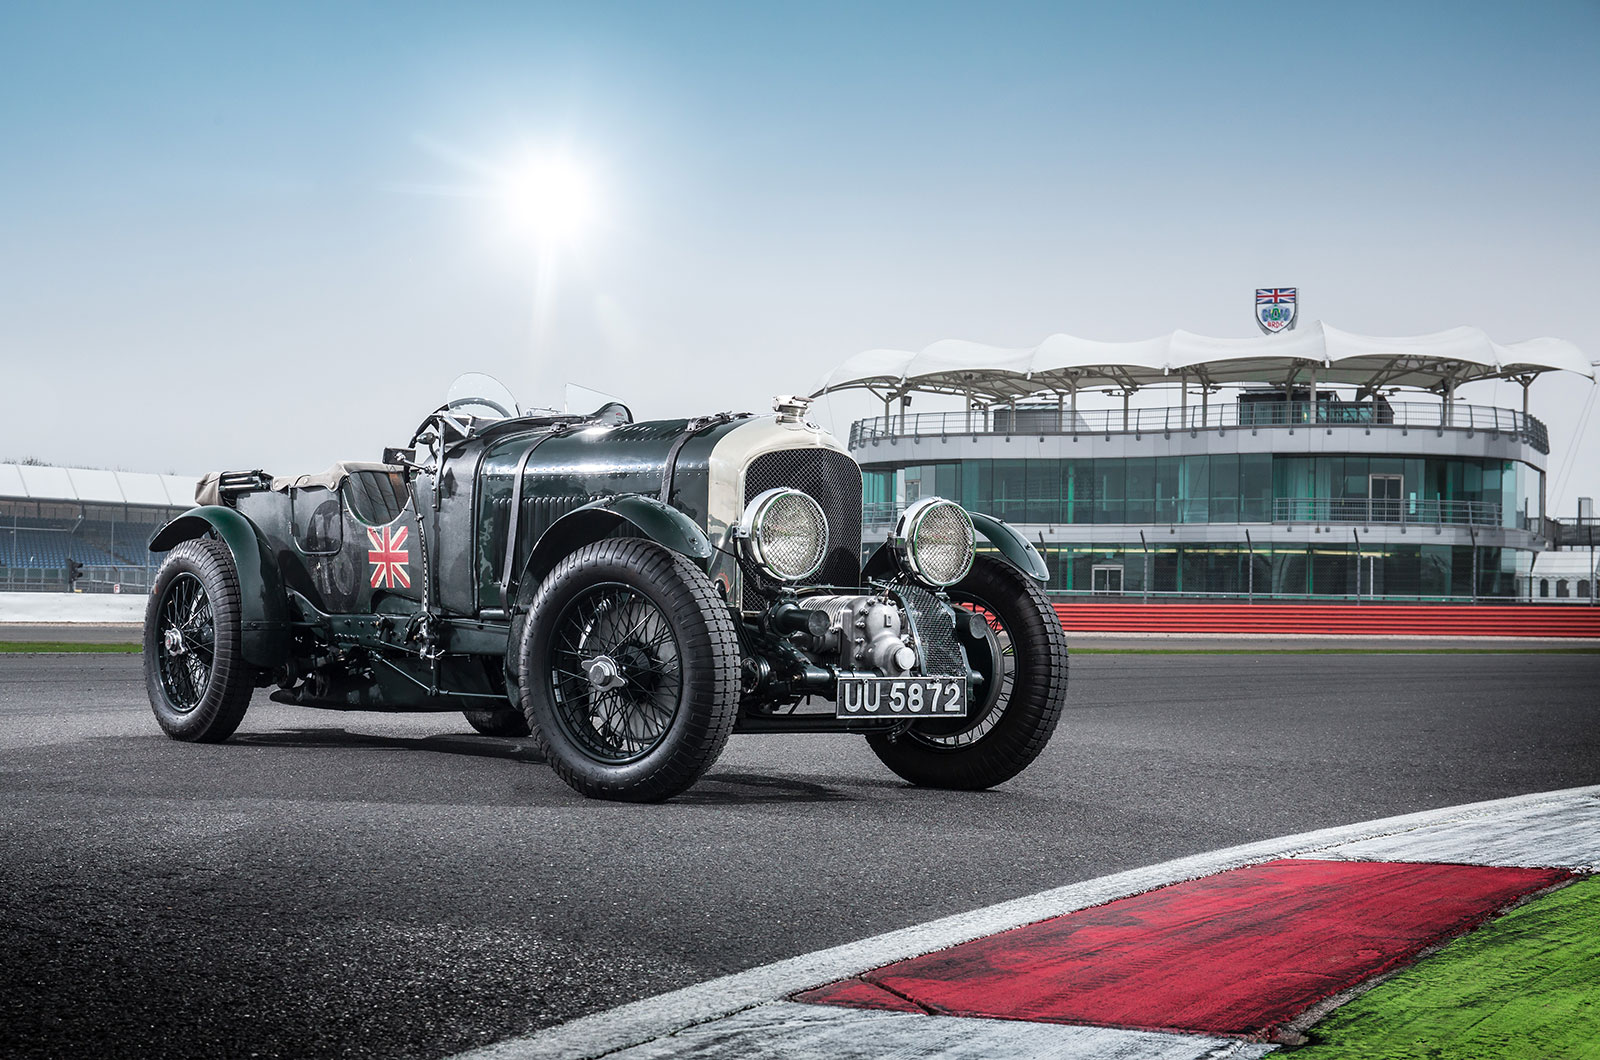 <p><span>The 4.5-Litre was a magnificent machine, but <strong>Sir Henry Birkin </strong>was disappointed by its performance. When Birkin asked WO Bentley about pepping things up, the latter replied that the <strong>6.5-Litre </strong>was the answer. Birkin was having none of it and bolted a supercharger to the 4.5-Litre to create the Blower Bentley – against WO's wishes. But it was a hell of a machine and <strong>55 </strong>were made between 1929 and 1931.</span></p>